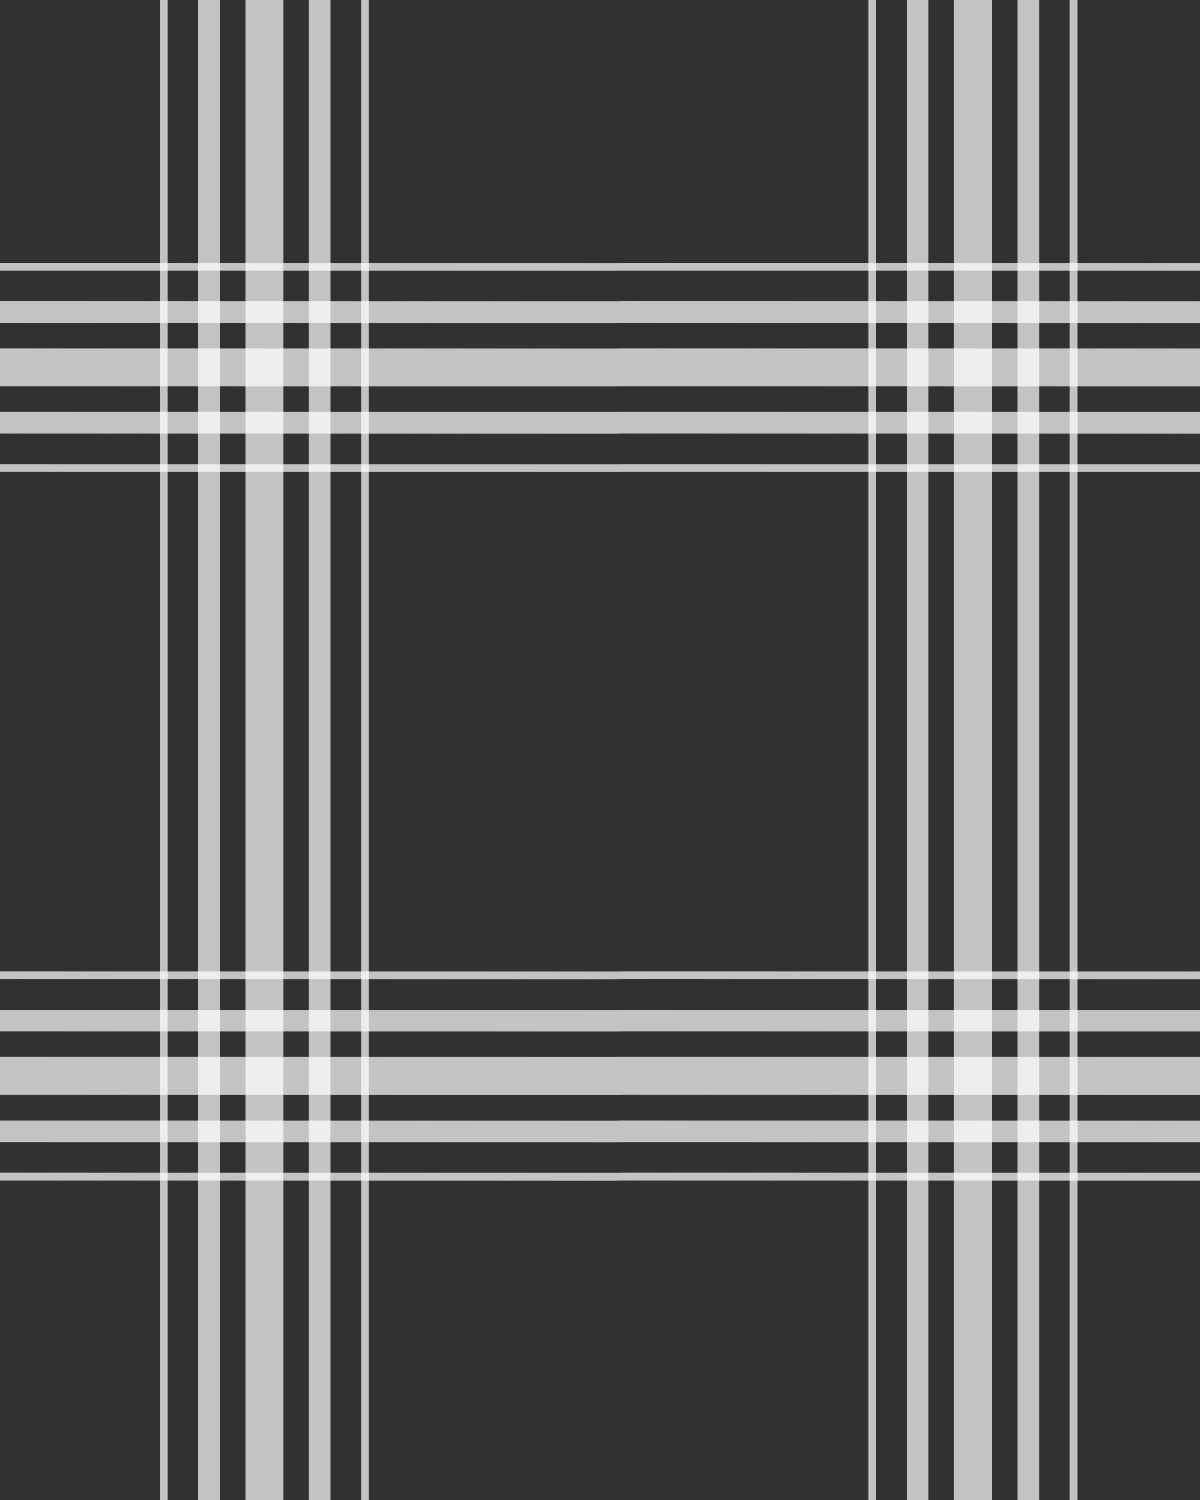 Removable Wallpaper Swatch  Houndstooth Check Black White Preppy Custom  Prepasted Wallpaper by Spoonflower  Walmartcom